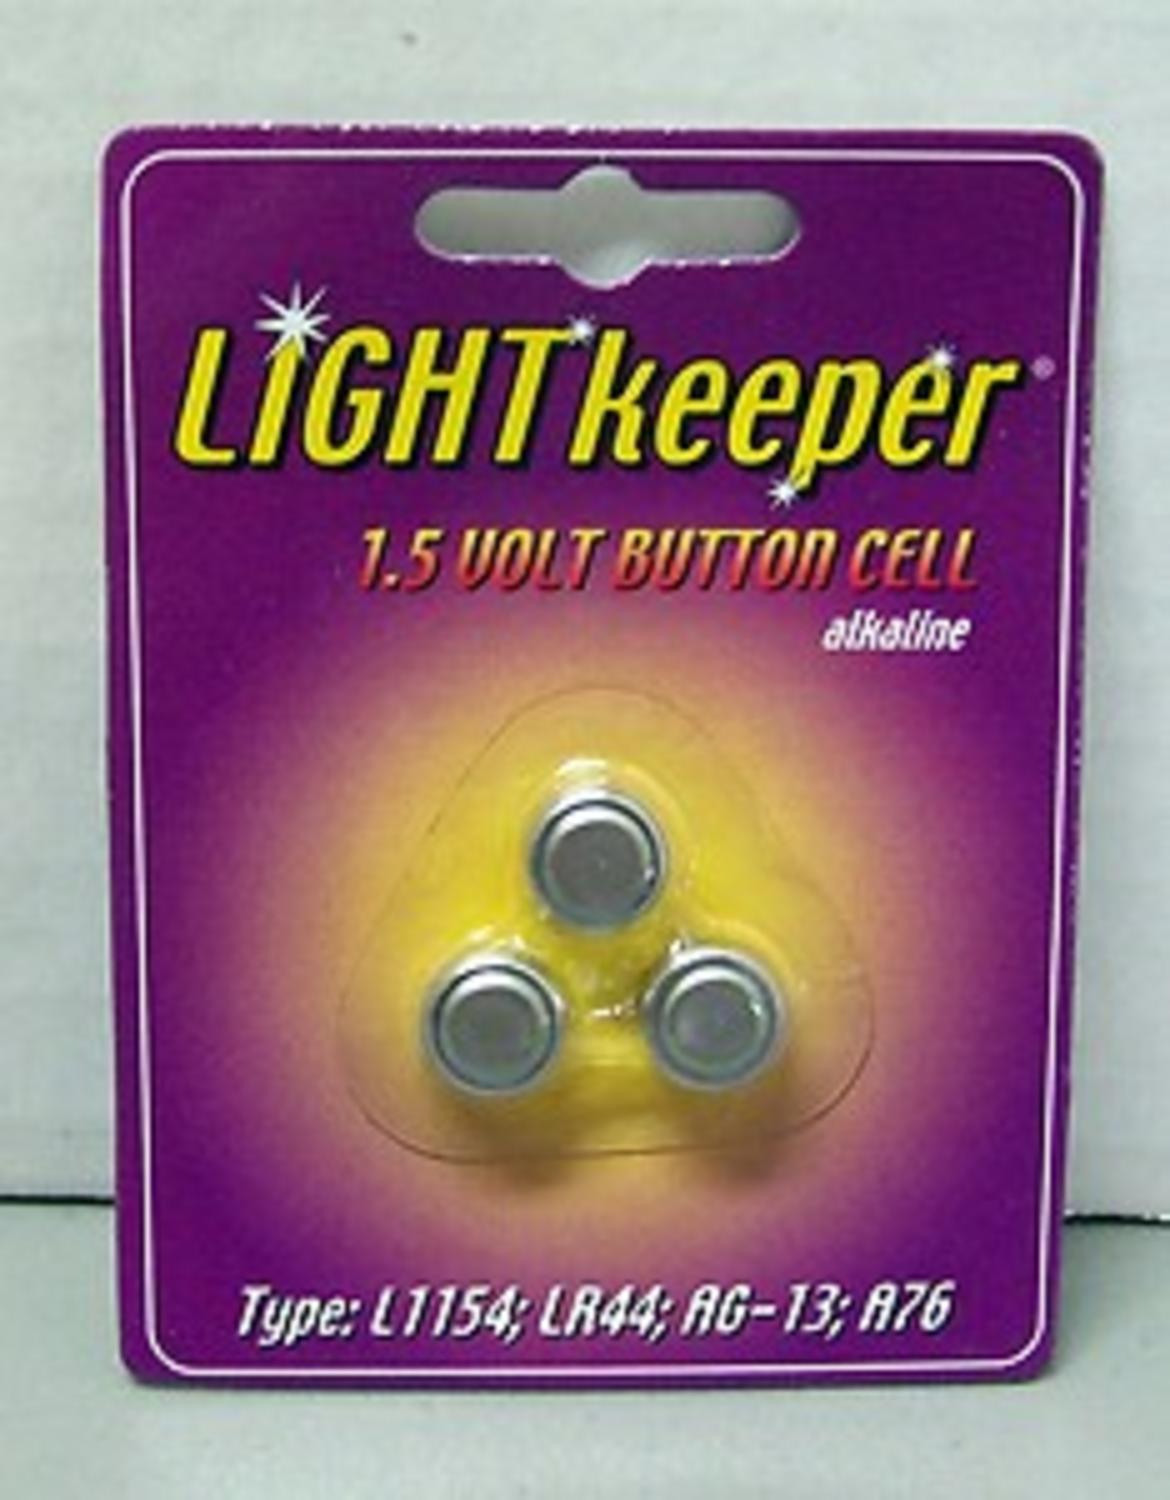 how does the light keeper pro work